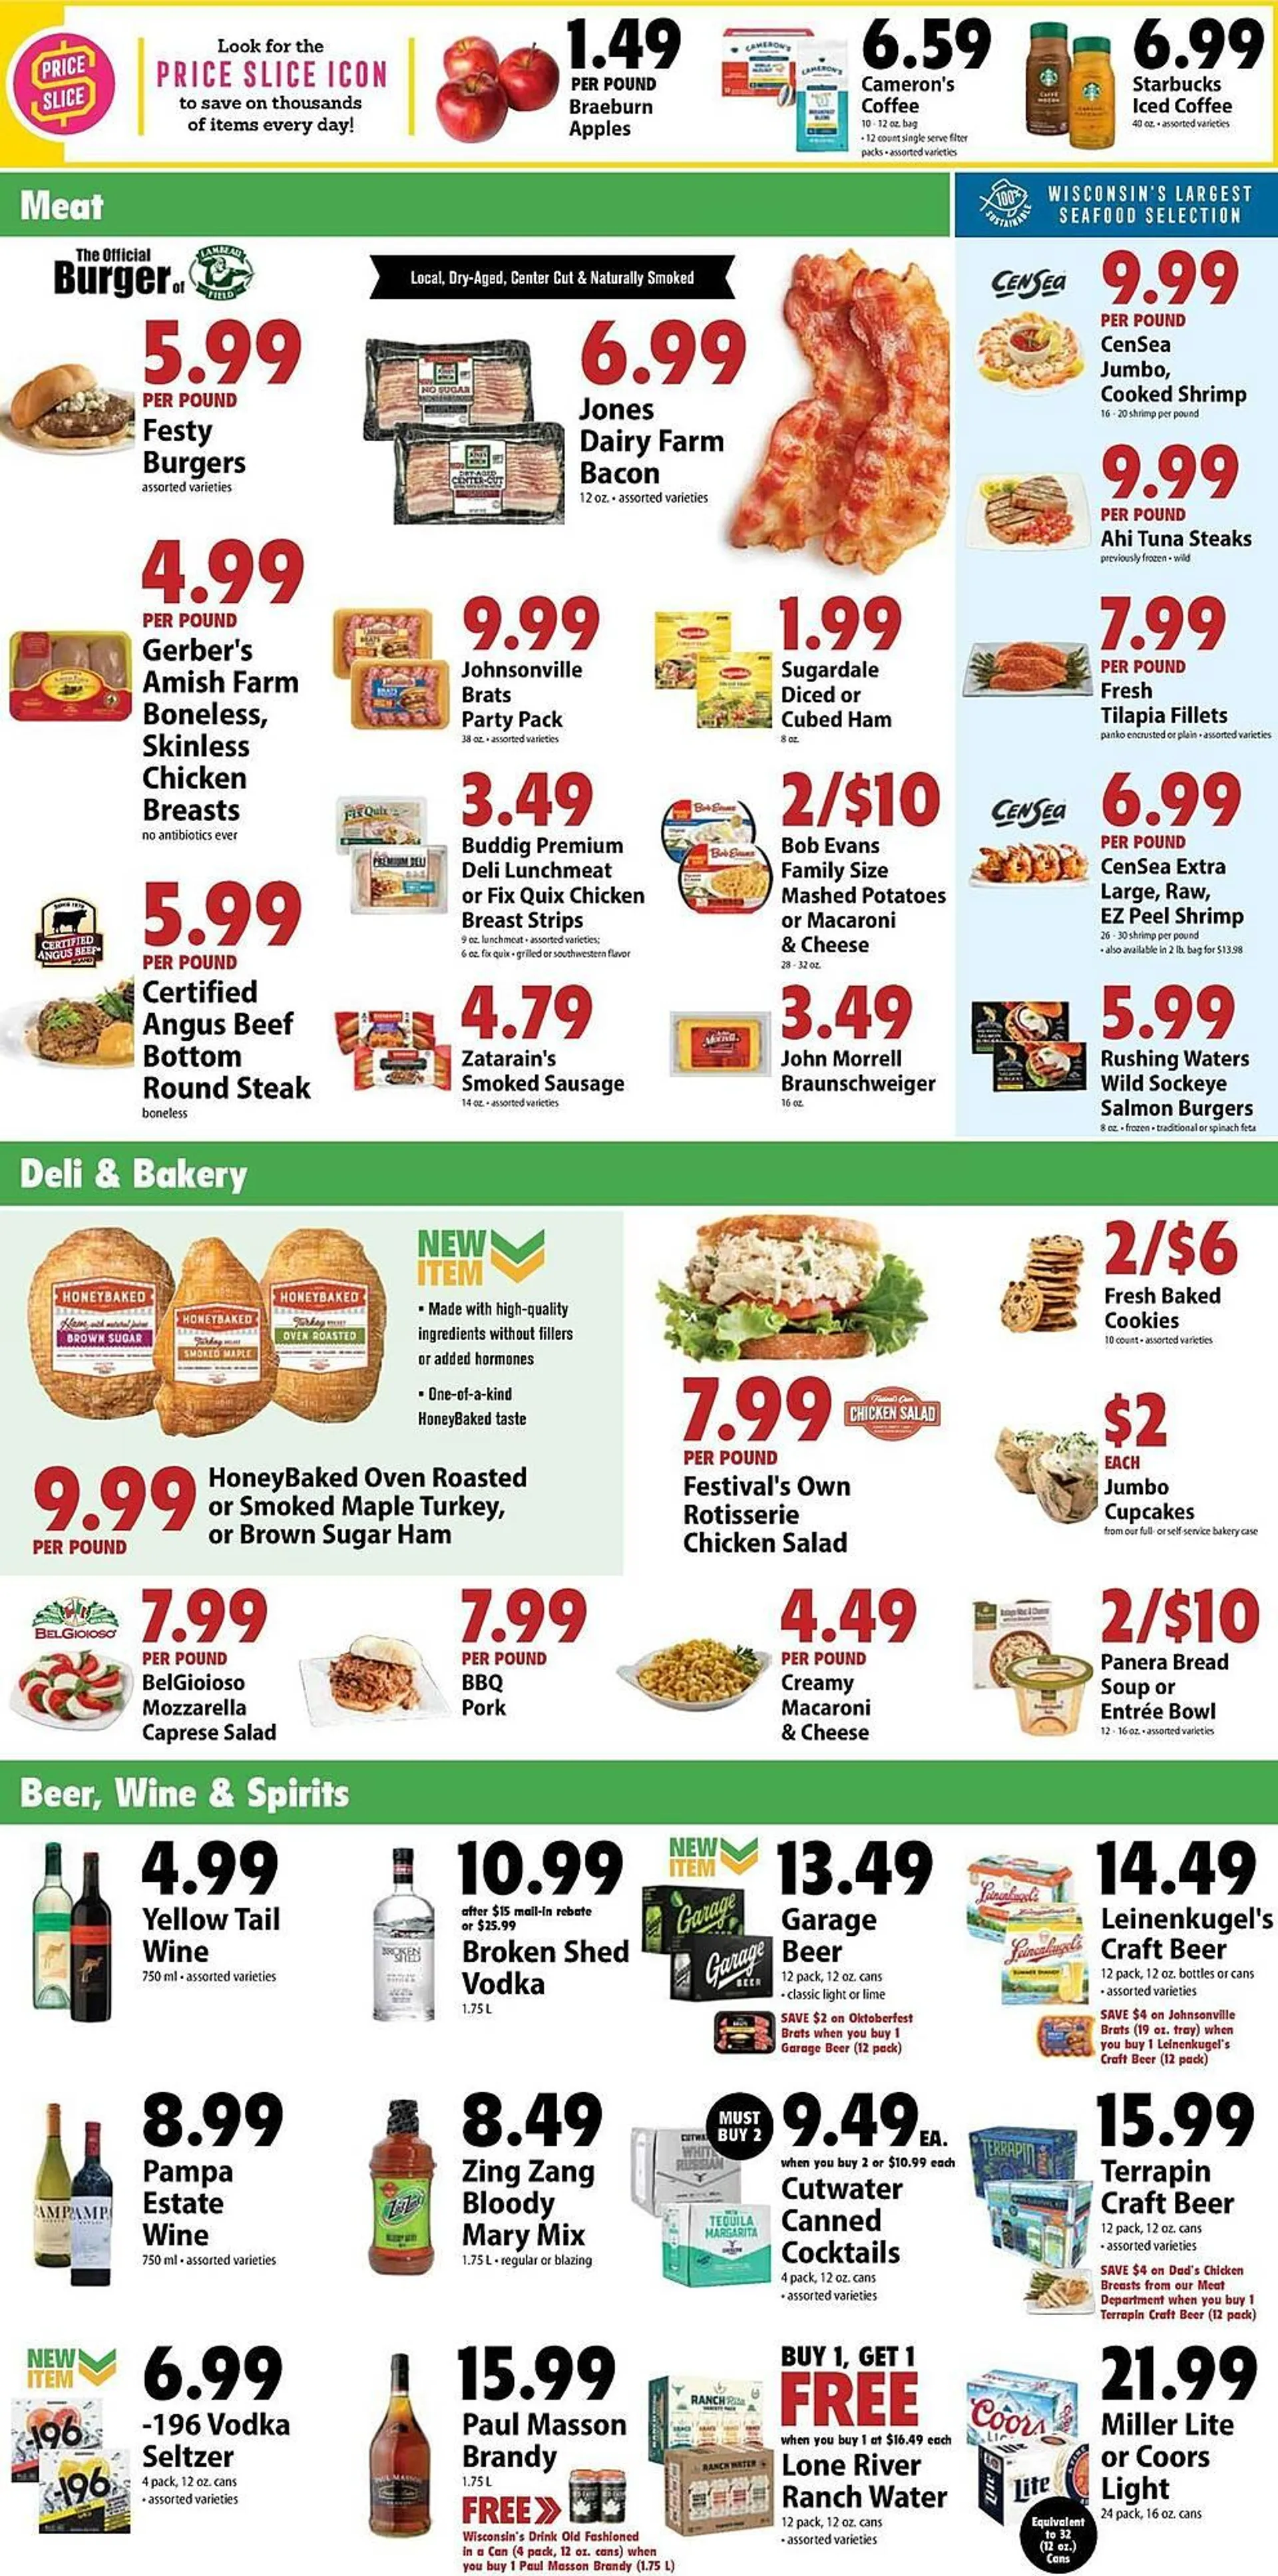 Festival Foods Weekly Ad - 2